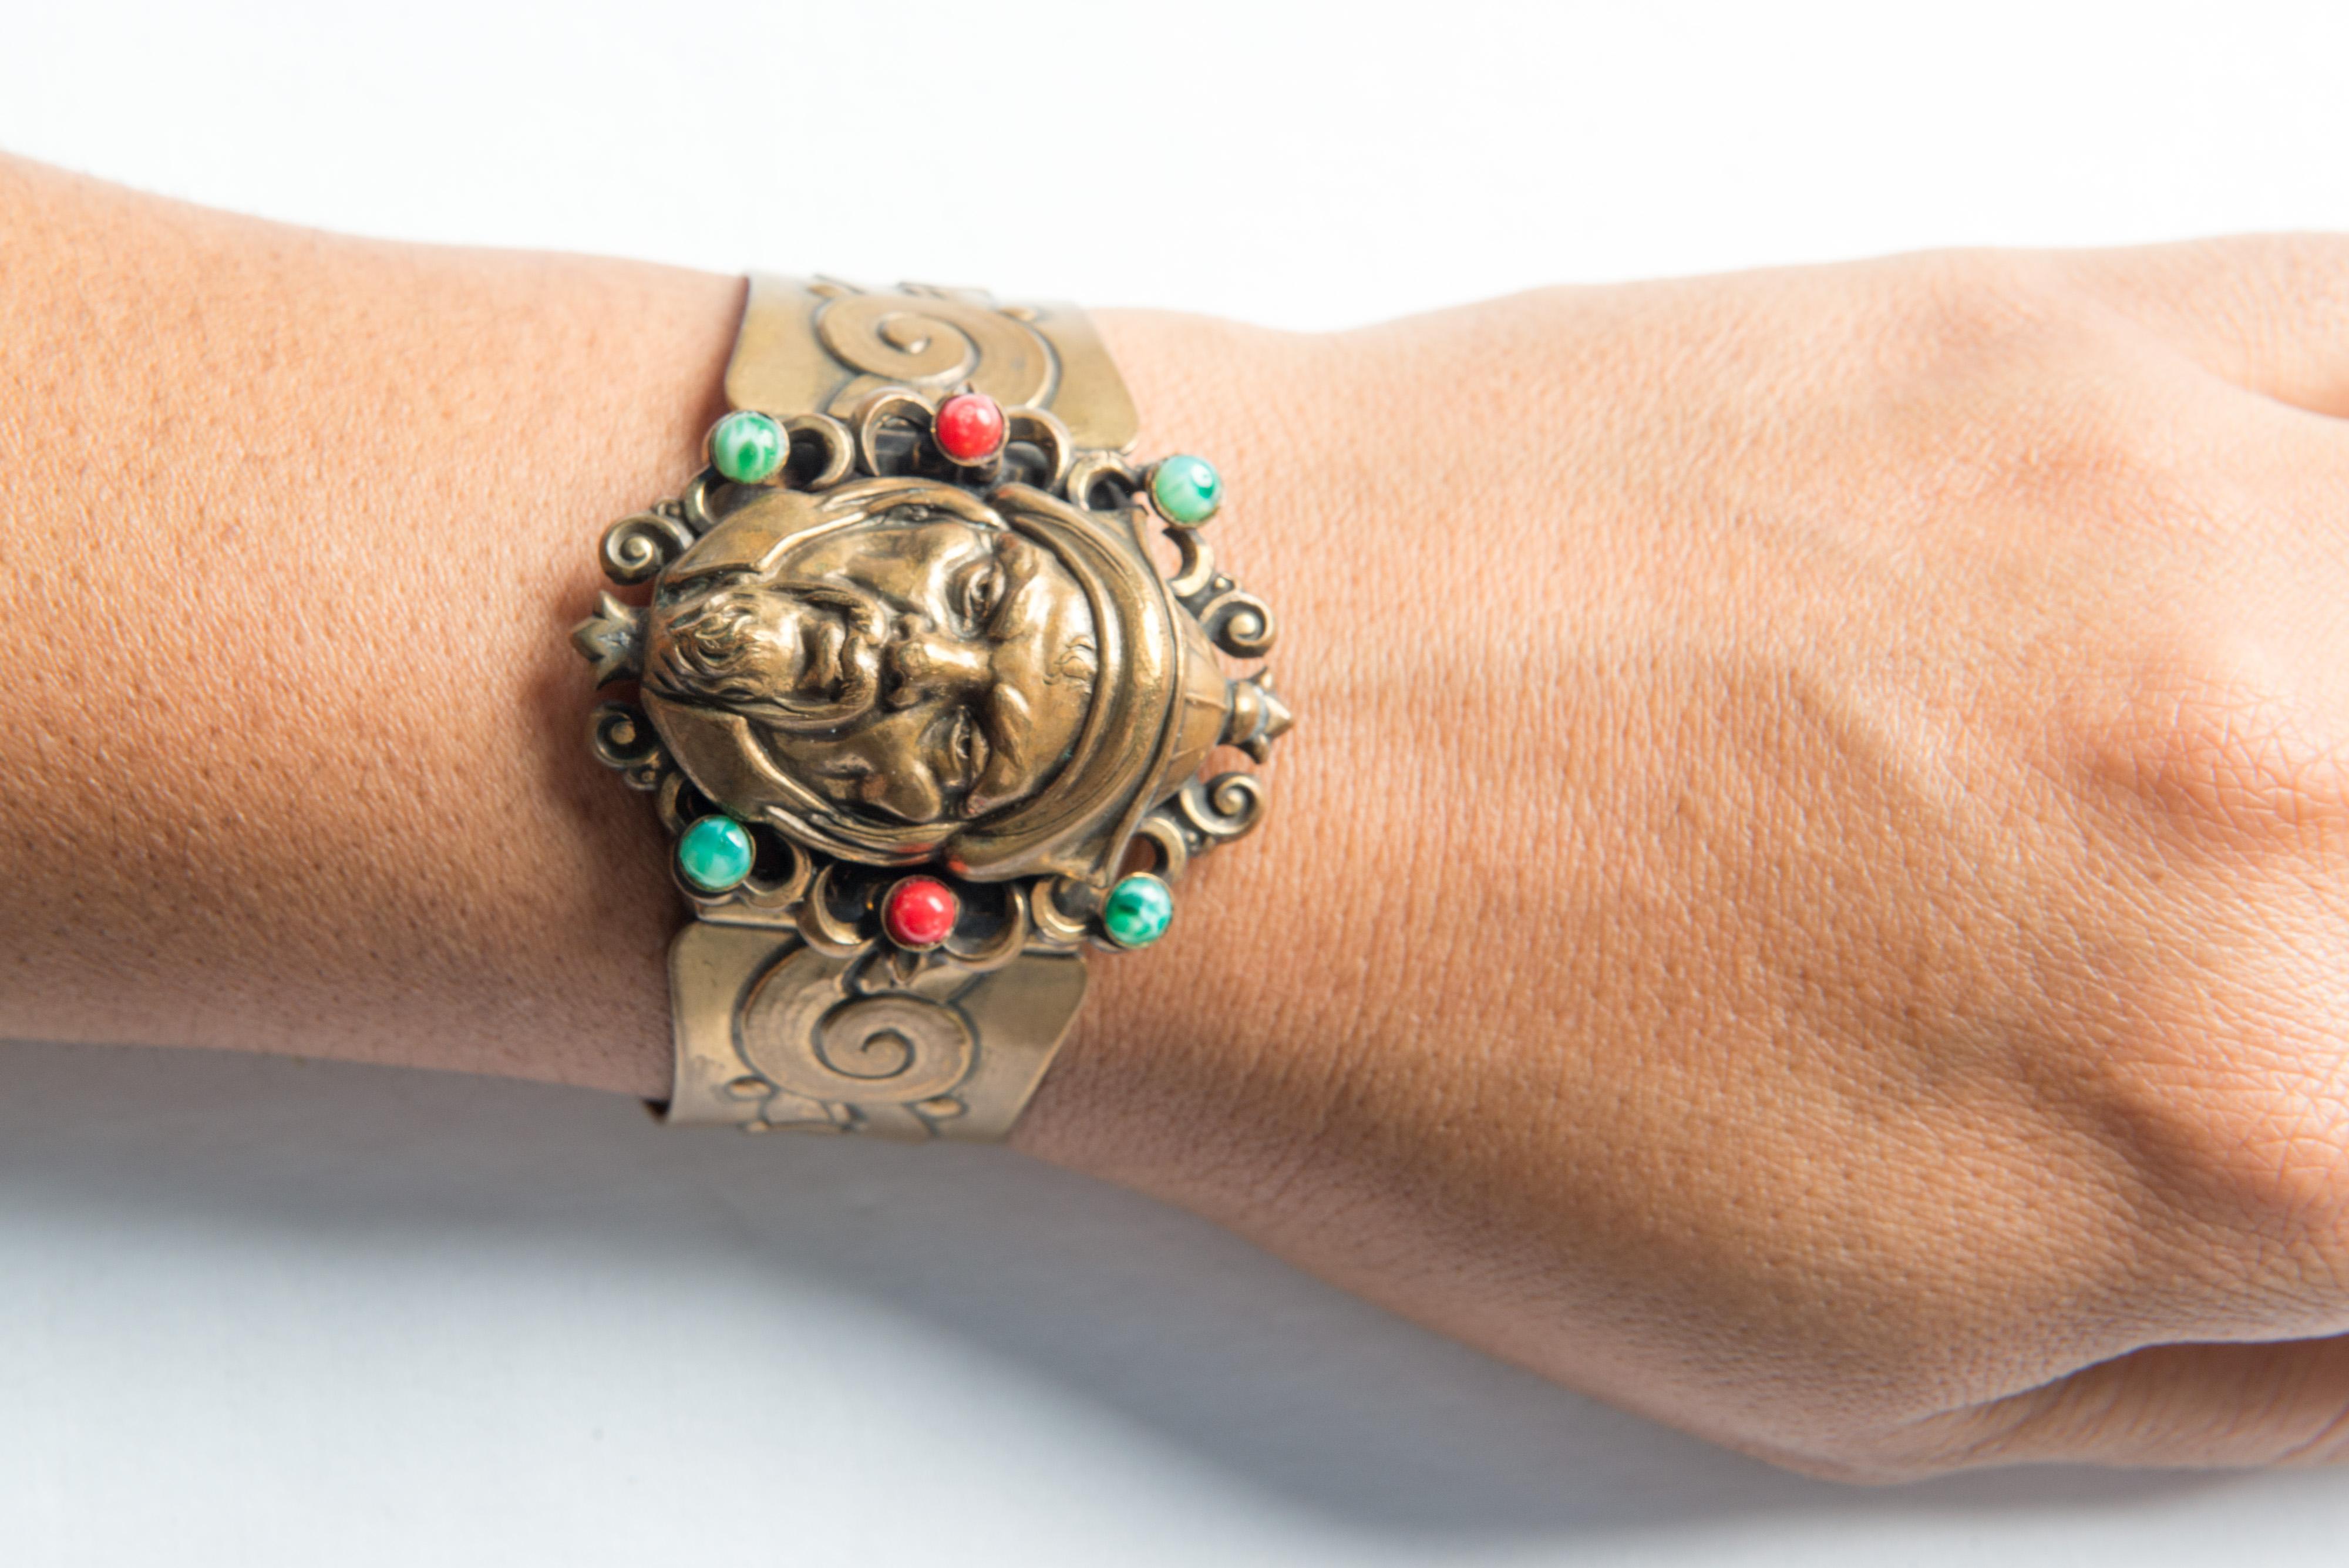 Expandable brass Hobe cuff with detailed face of a warrior decorated with three red jewels and three blue jewels. Safety chain is missing. Signed. 